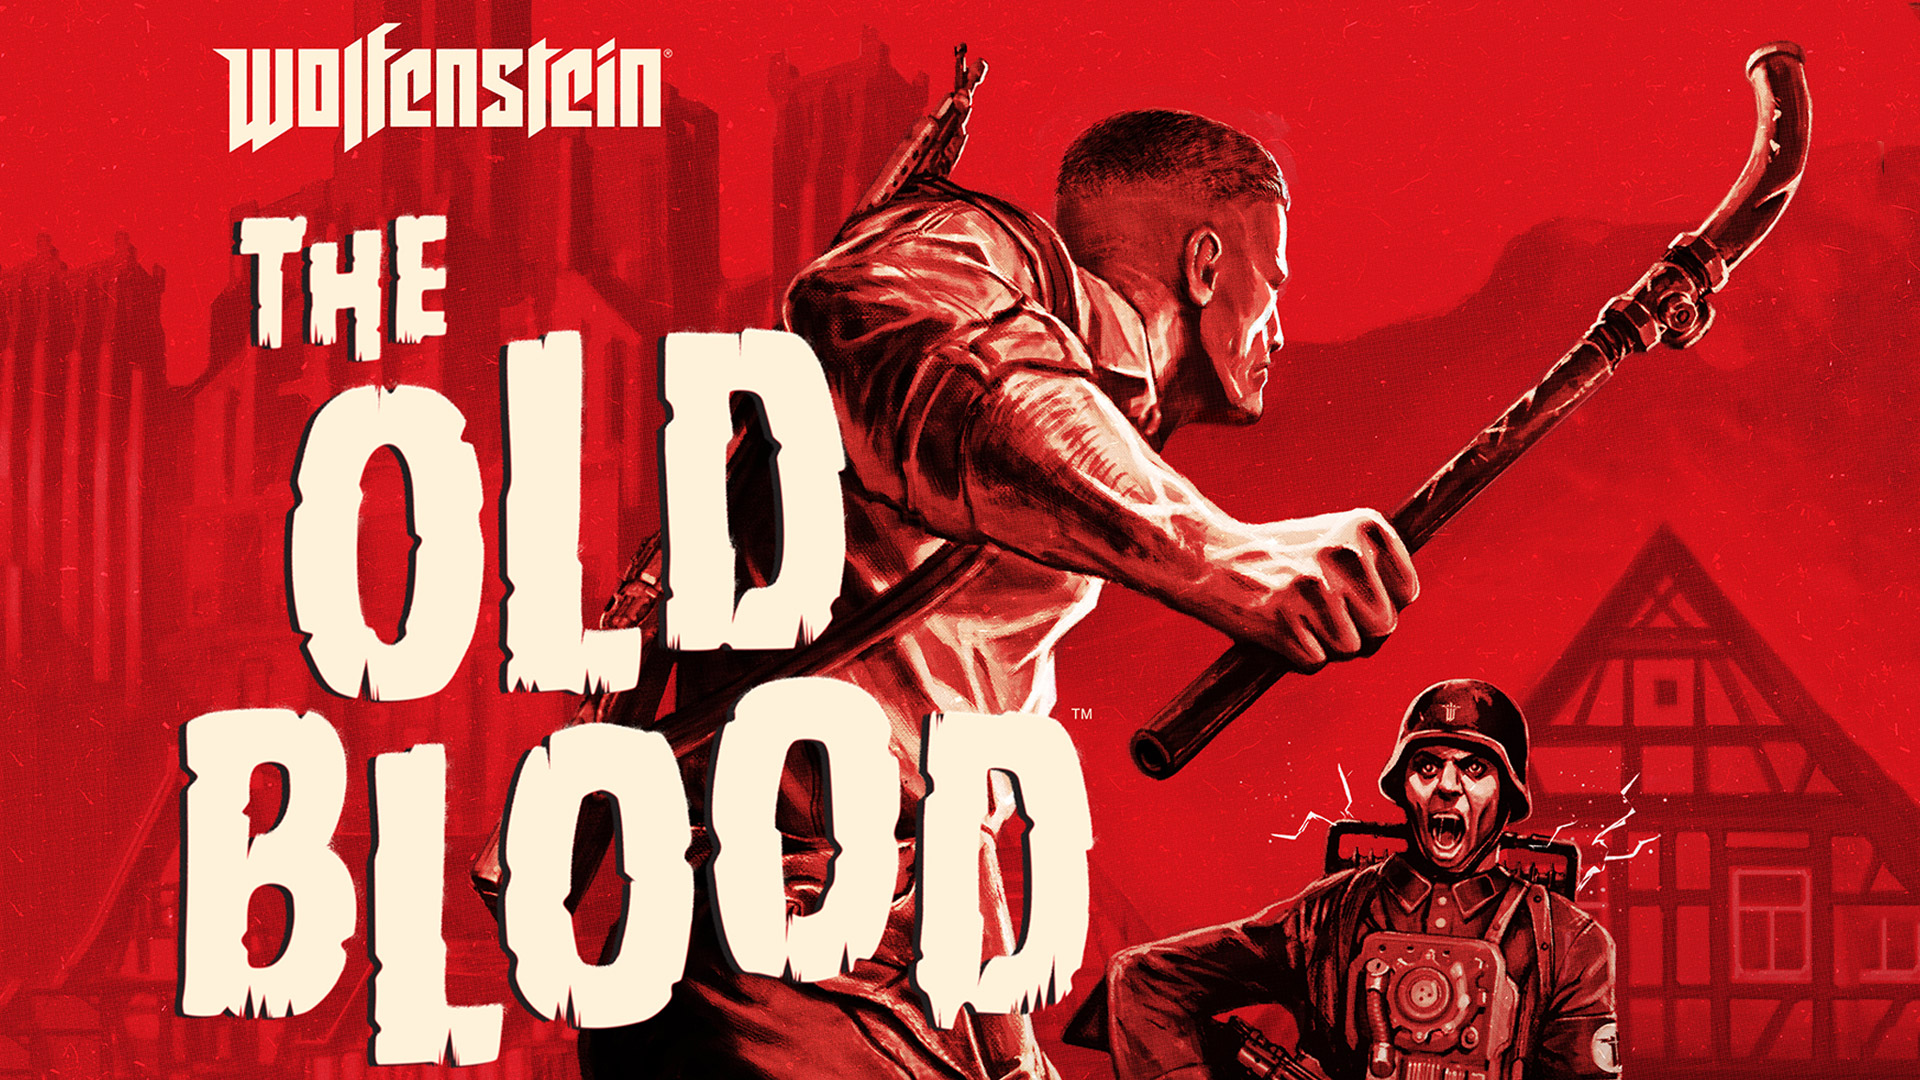 Wolfenstein: The Old Blood Backgrounds, Compatible - PC, Mobile, Gadgets| 1920x1080 px